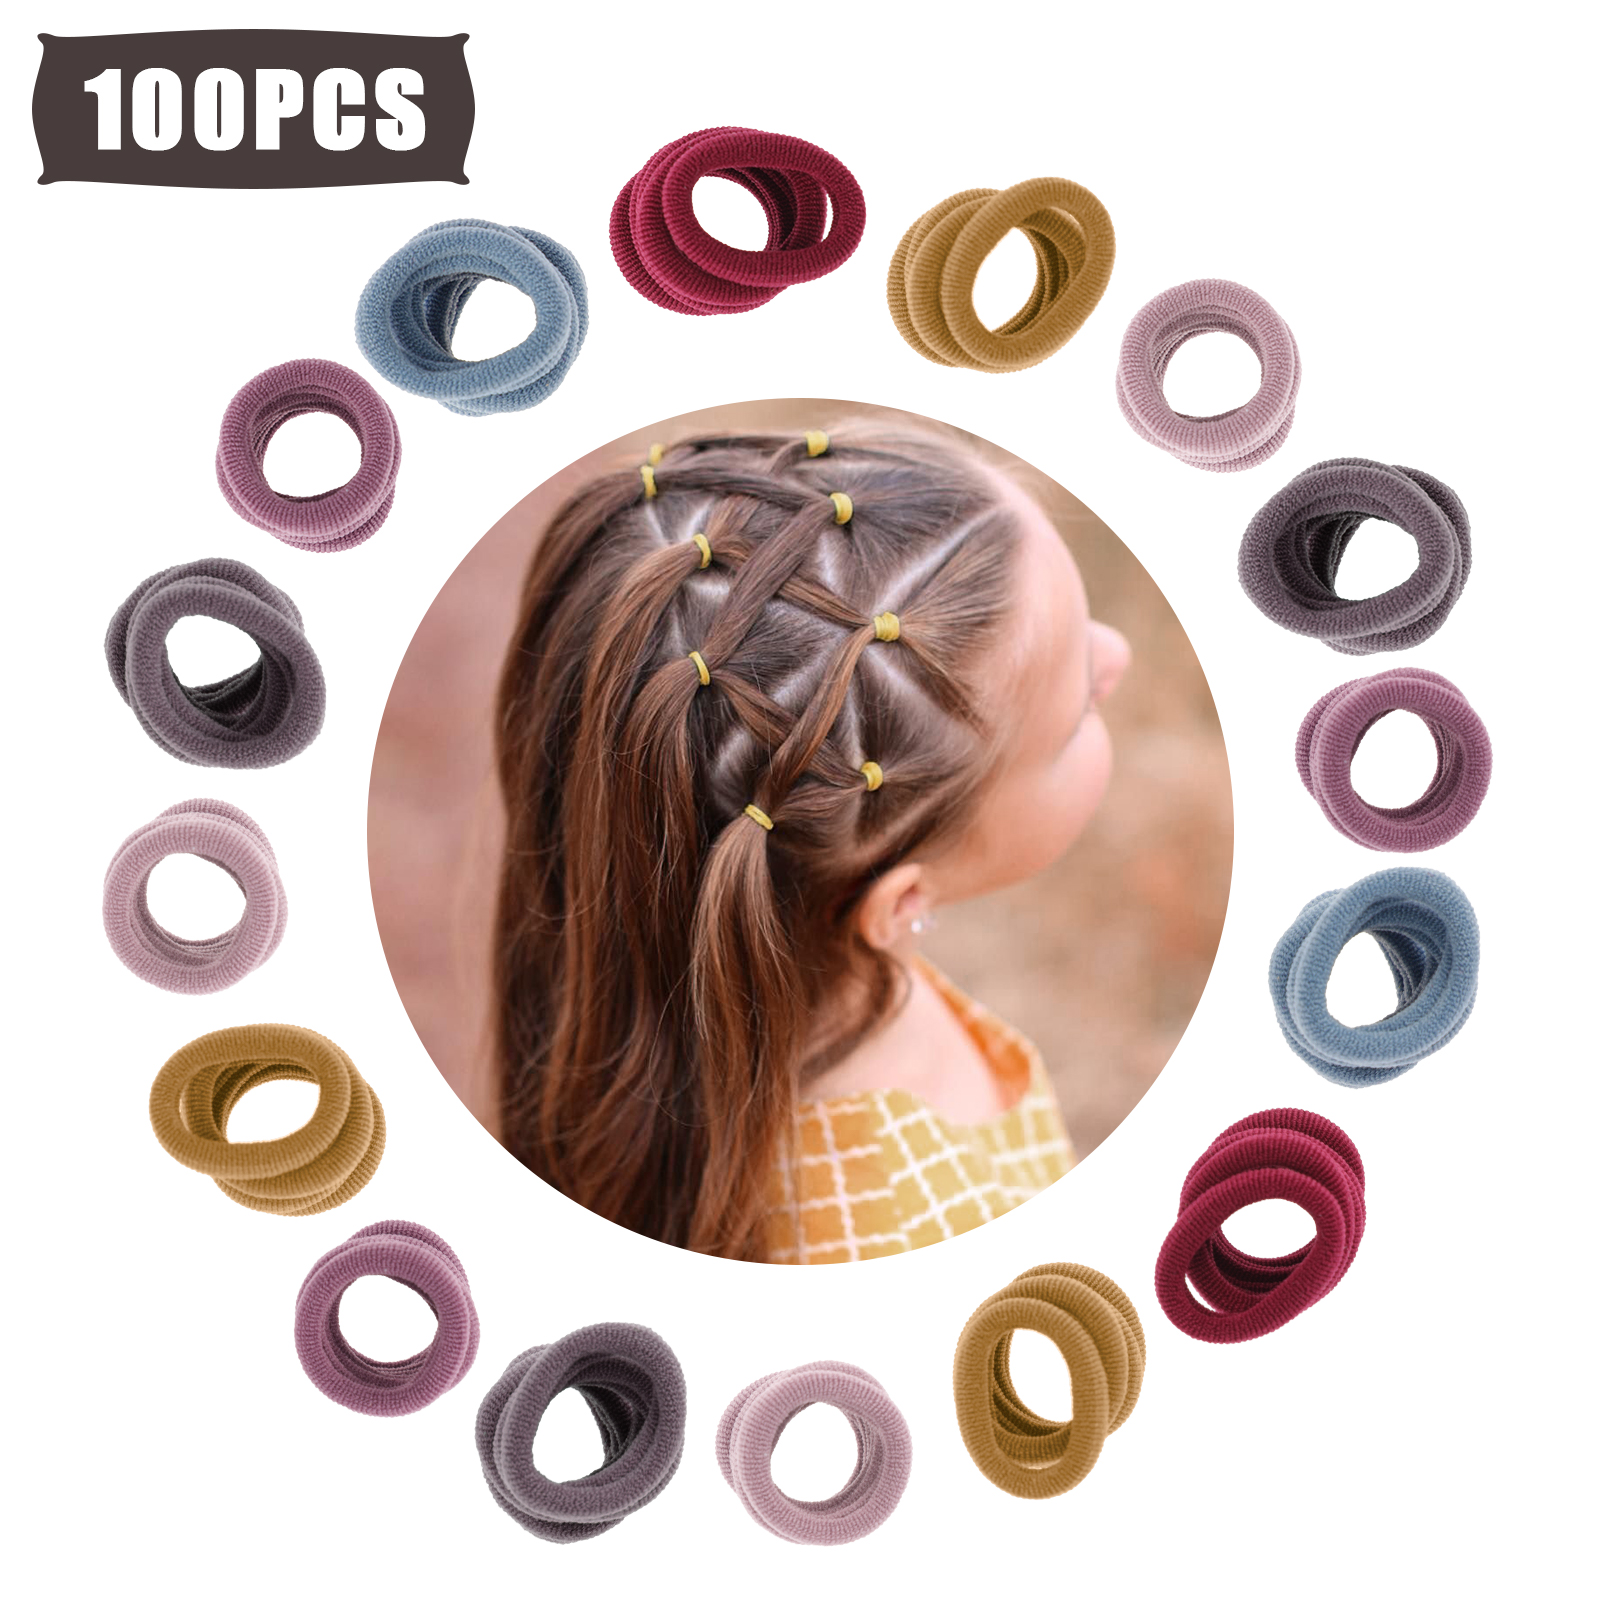 100Pcs Elastic Hair Ties for Girls, Soft Cotton Hair Bands with Multicolor, Small Seamless Hair Scrunchies, Ponytail Holders - image 1 of 9